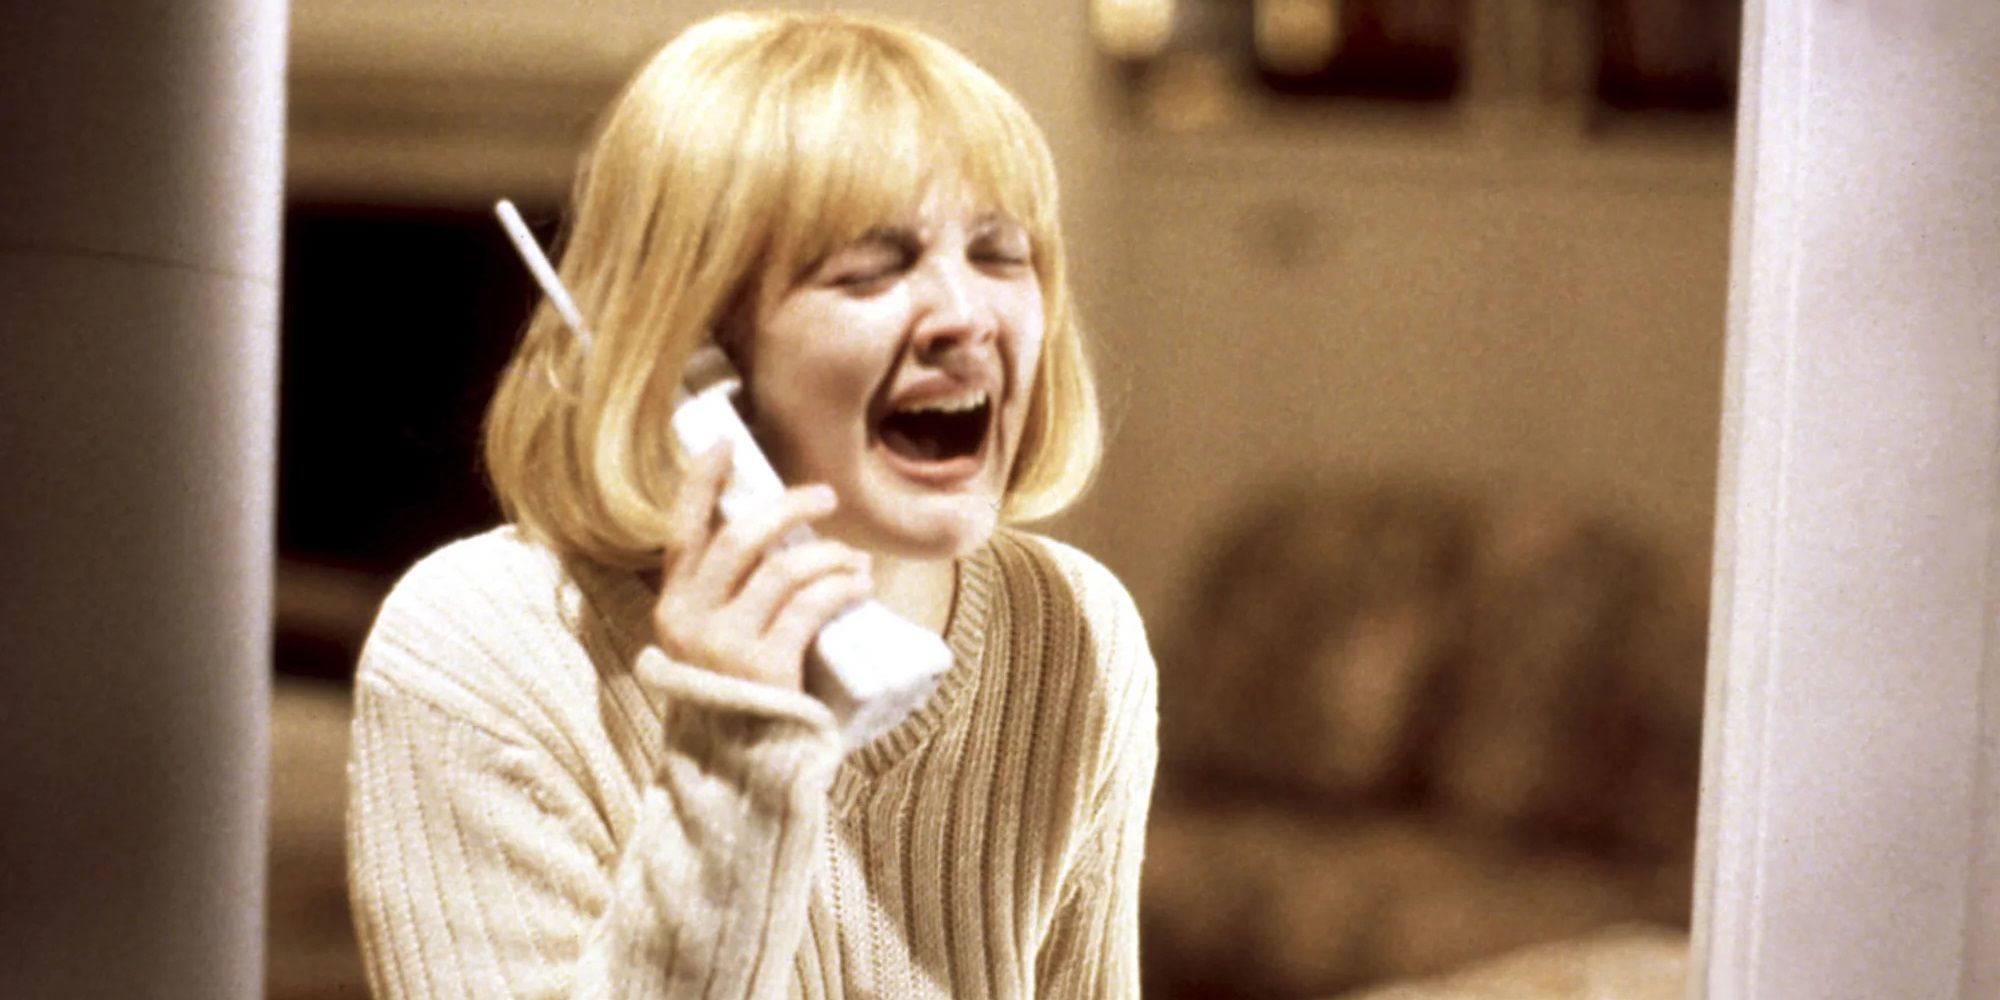 Casey screaming into the phone in the opening scene of Scream